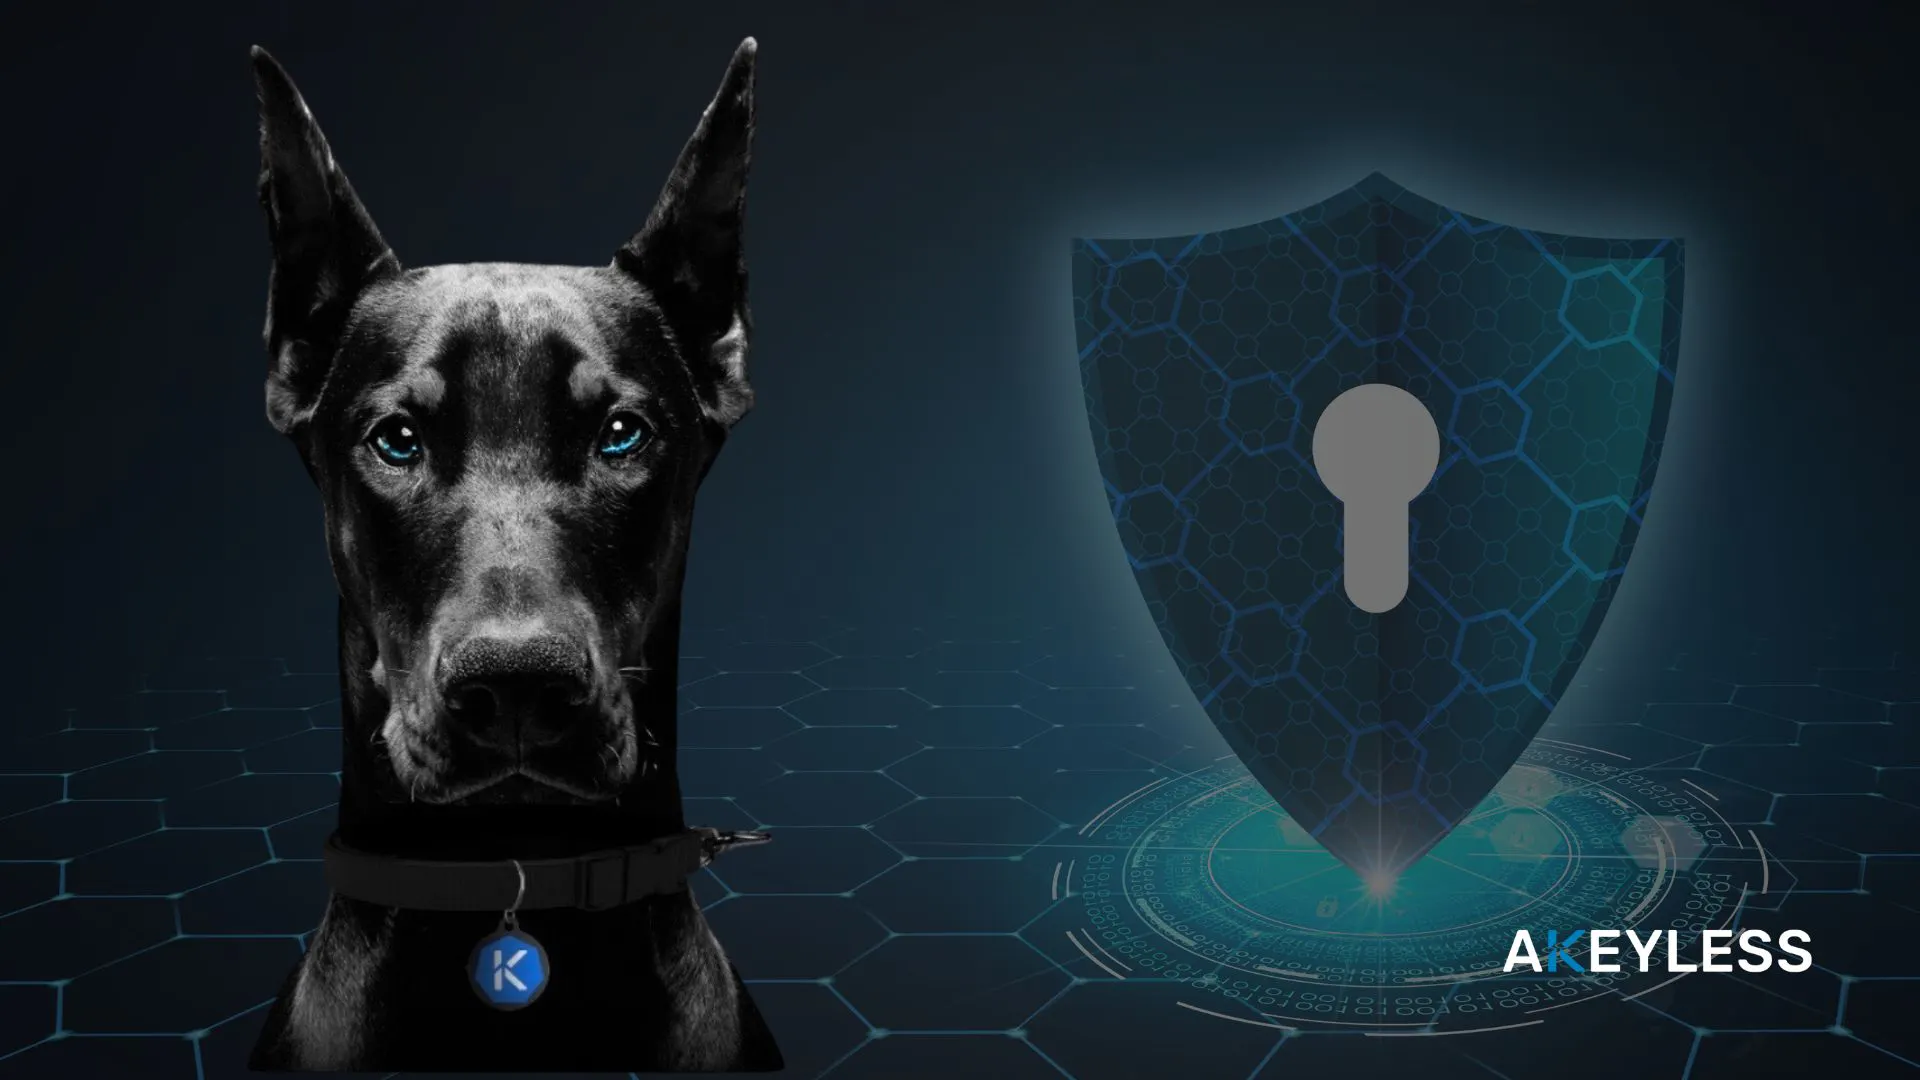 Akeyless black guard dog and cyber security logo